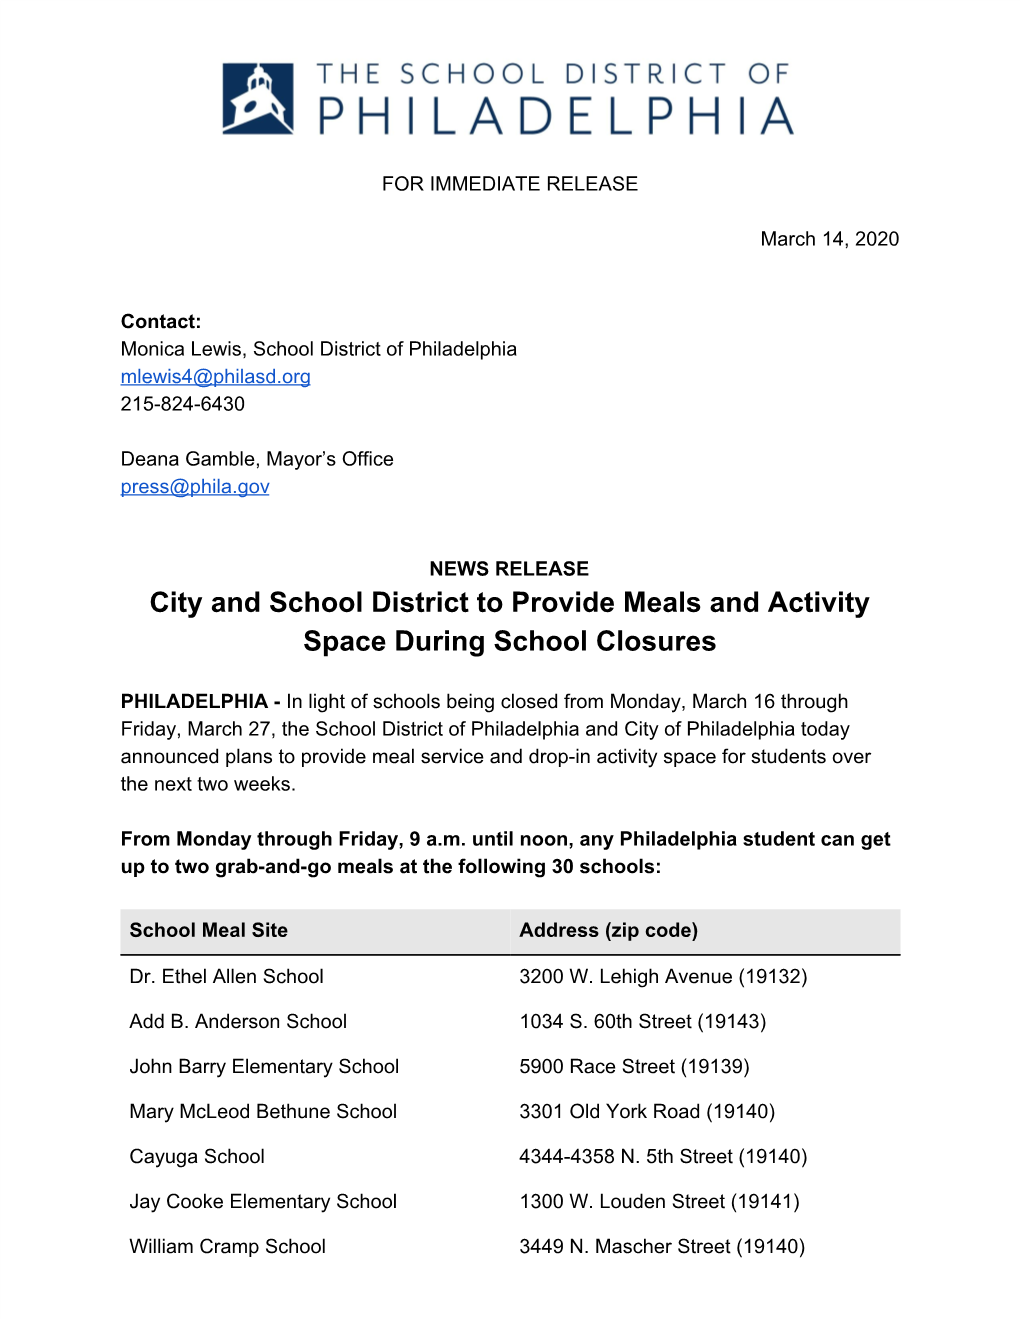 City and School District to Provide Meals and Activity Space During School Closures